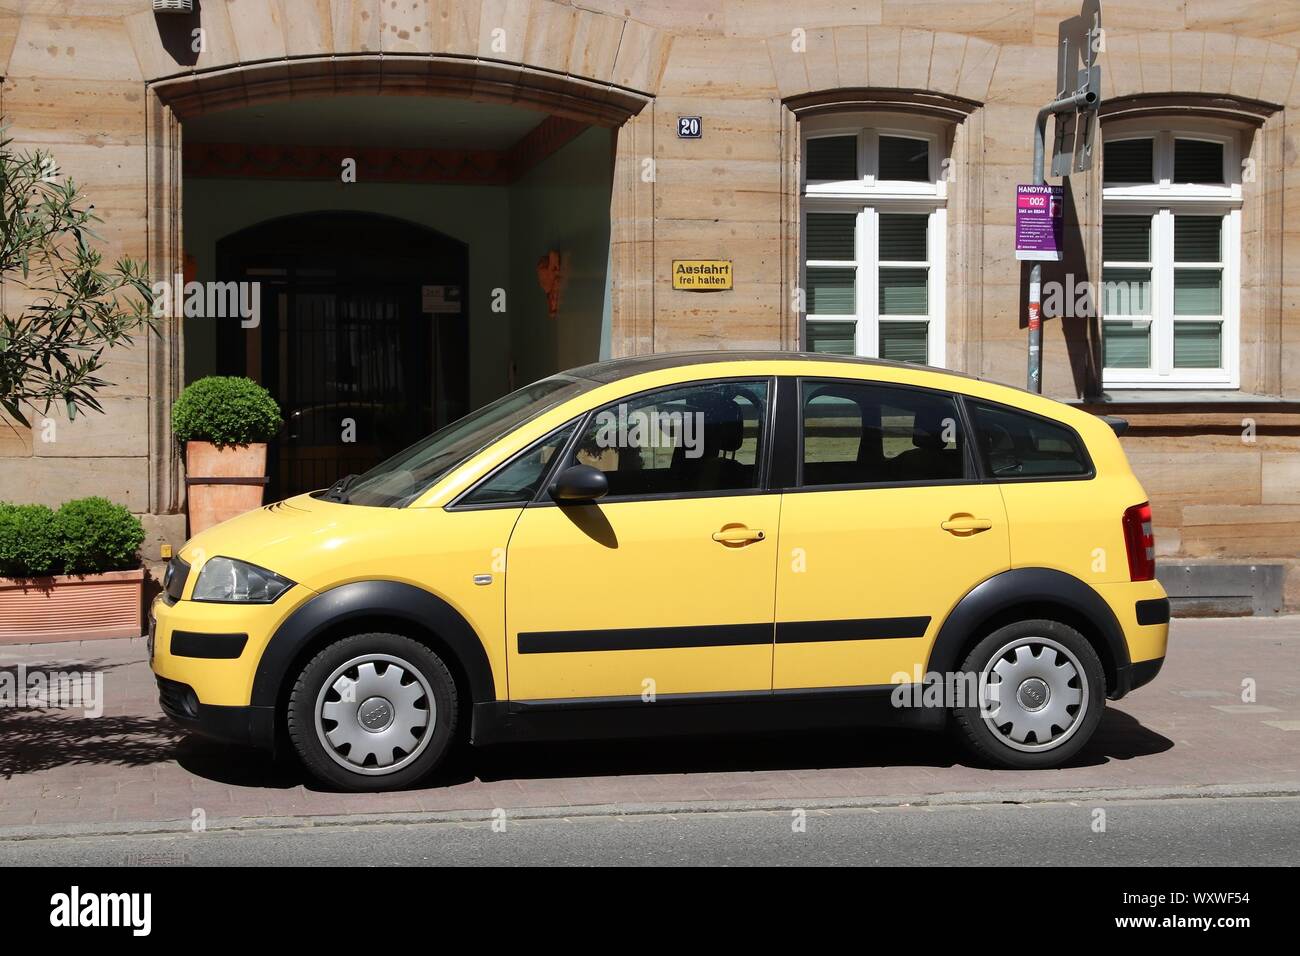 FURTH, GERMANY - MAY 6, 2018: Yellow Audi A2 compact mini car parked in Germany. The car was designed by Belgian car designer Luc Donckerwolke. Stock Photo